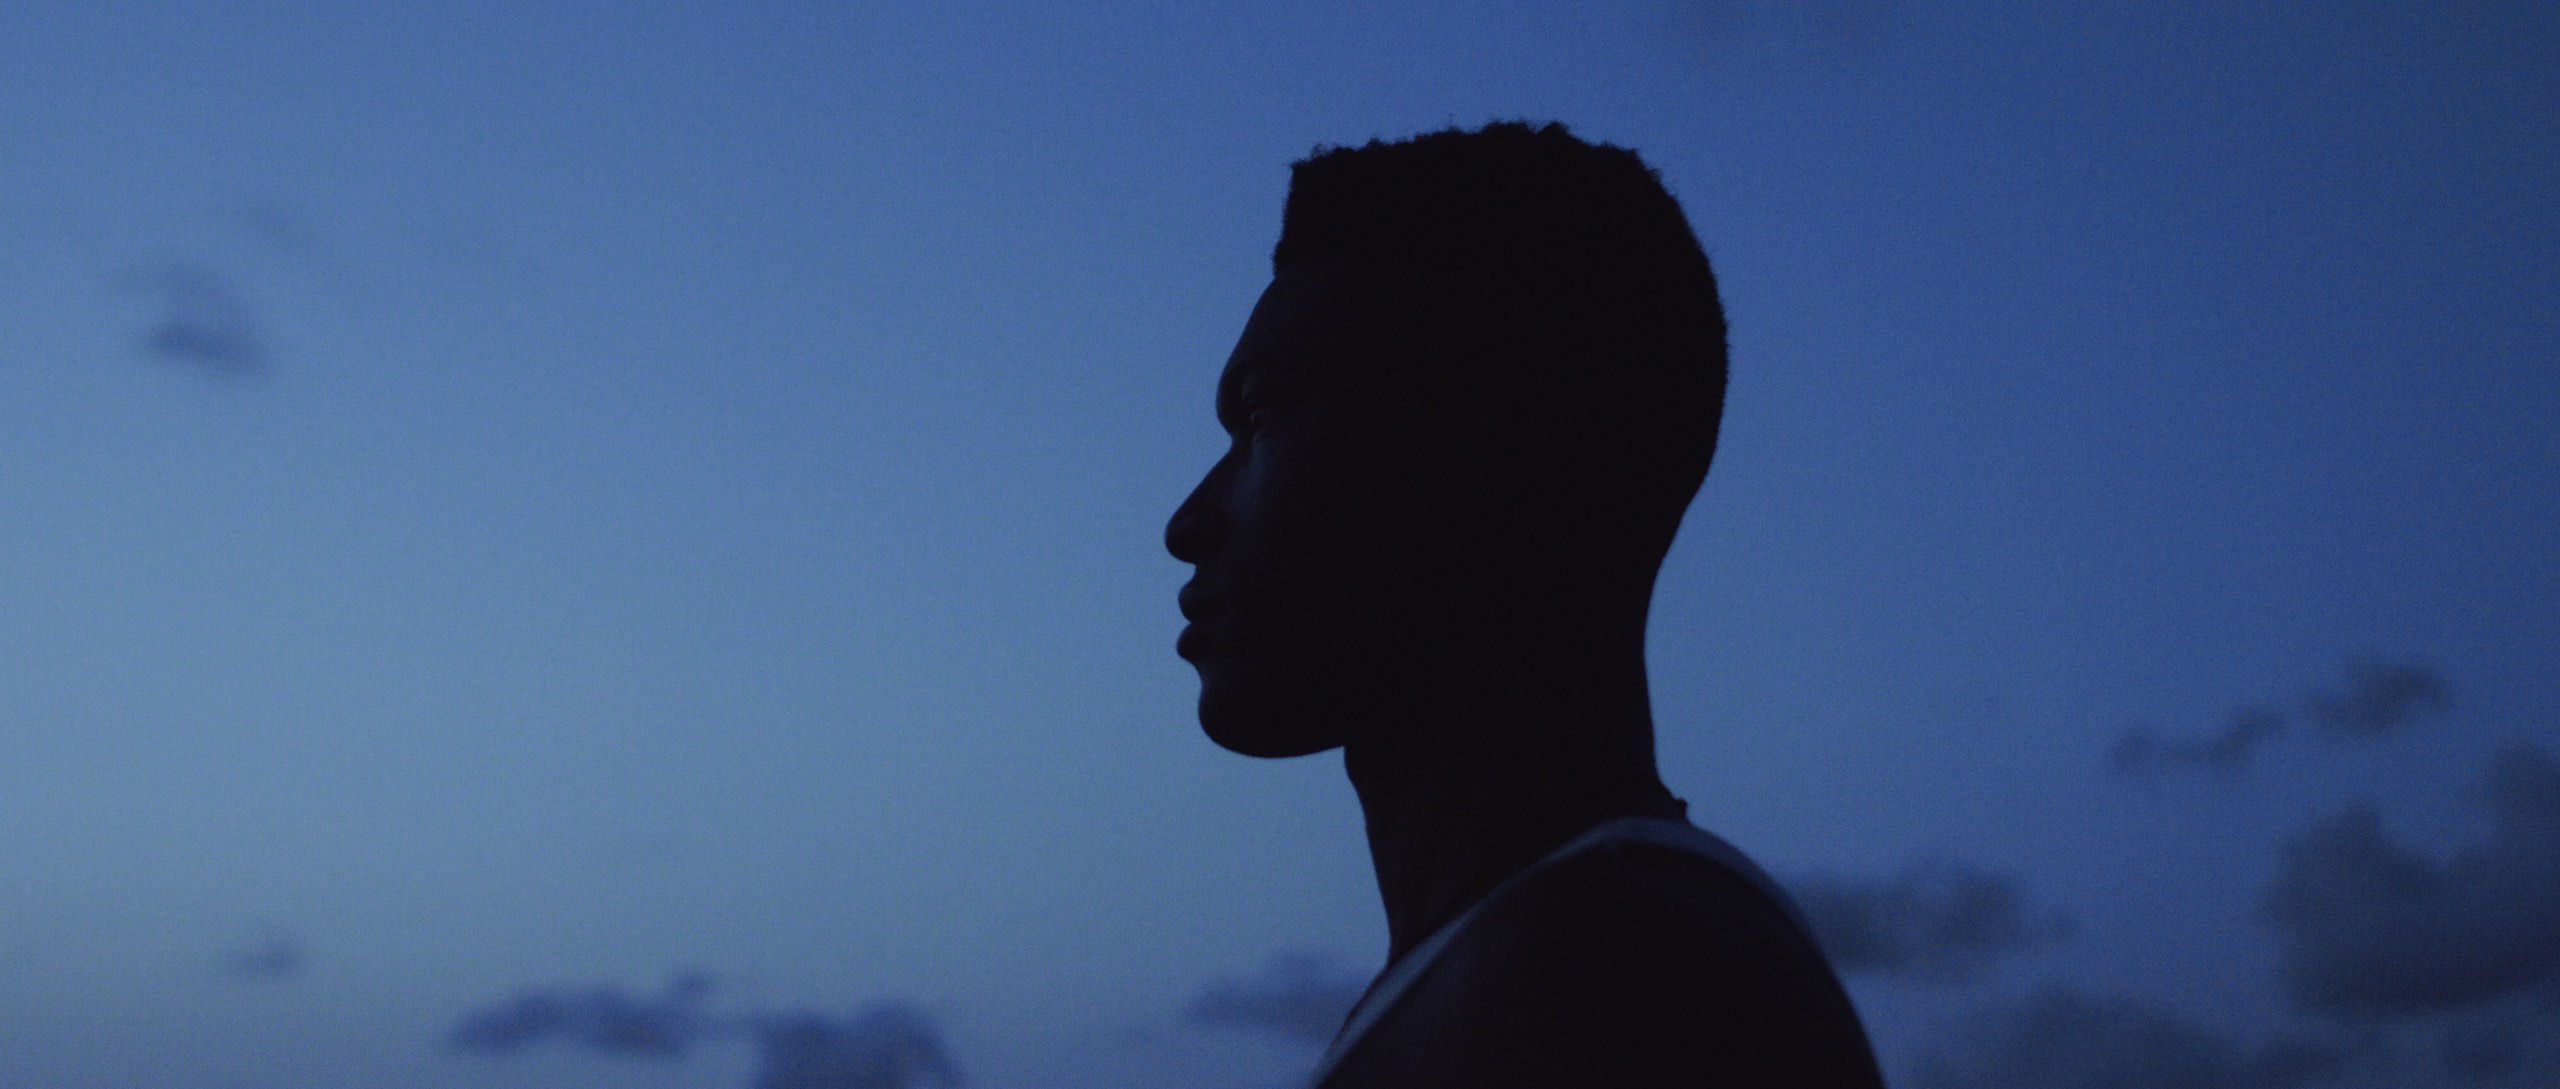 Black Violin Impossible is Possible Music Video with side profile headshot of a man at dusk looking off into the distance